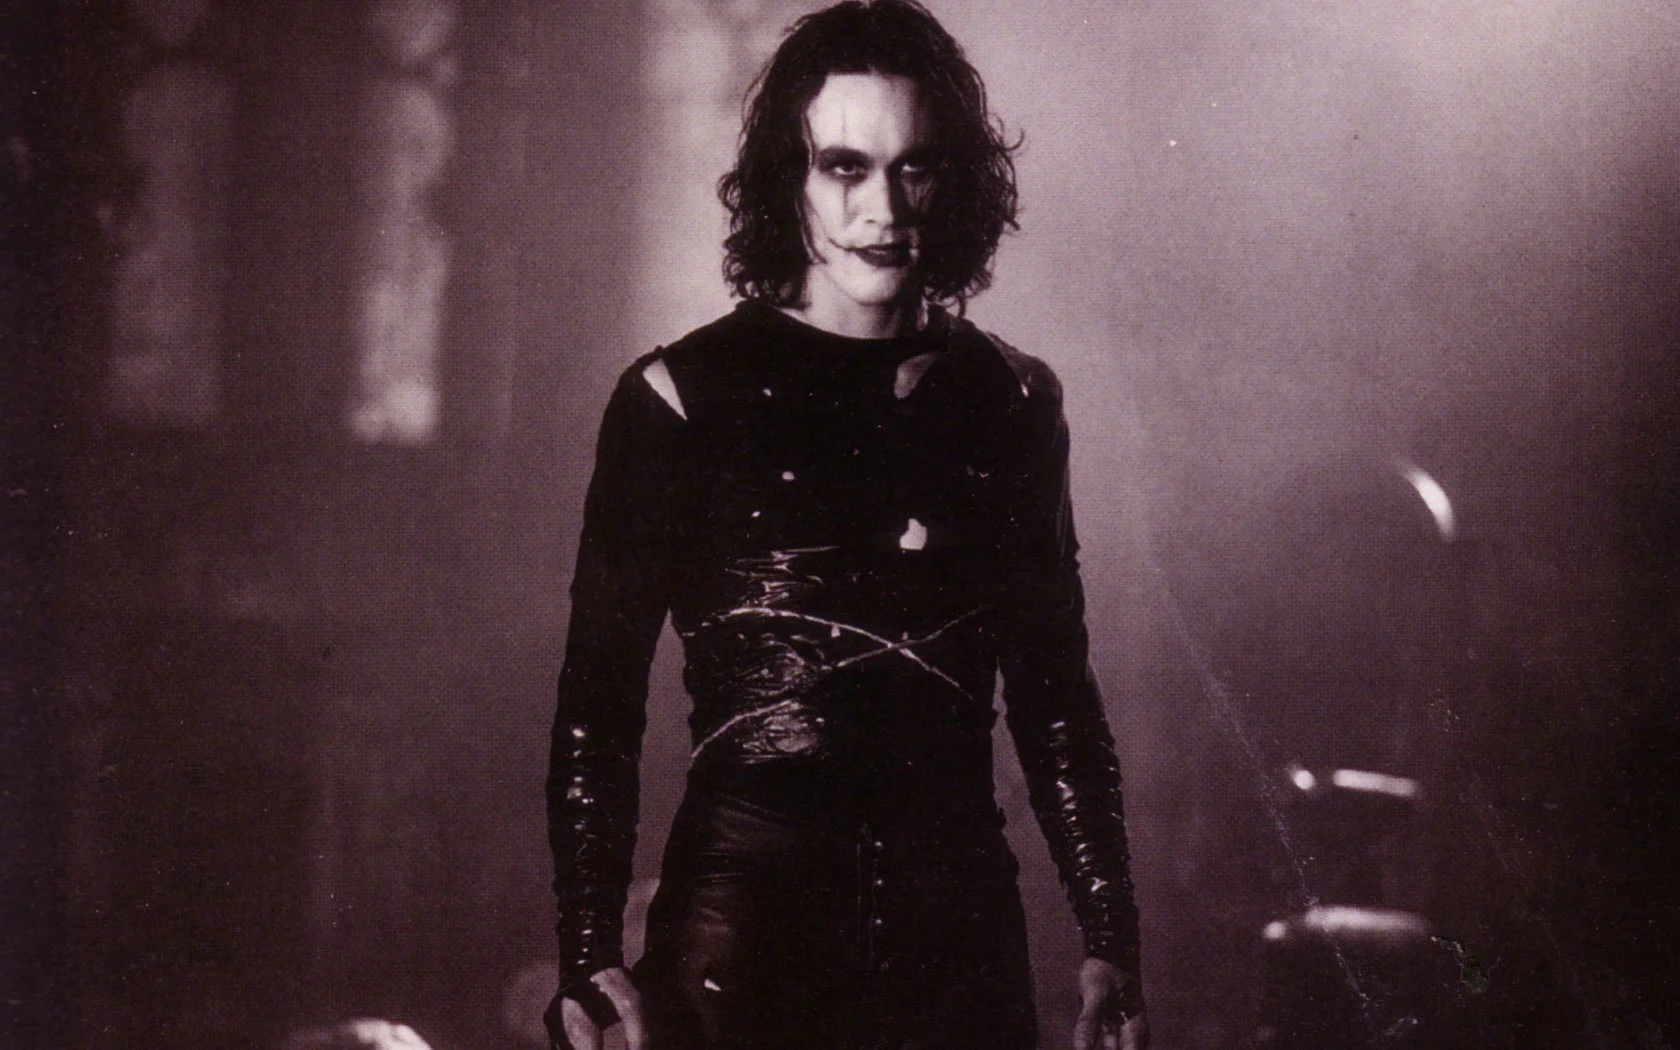 The reboot version of the classic cult film "The Crow‎" exposes new progress